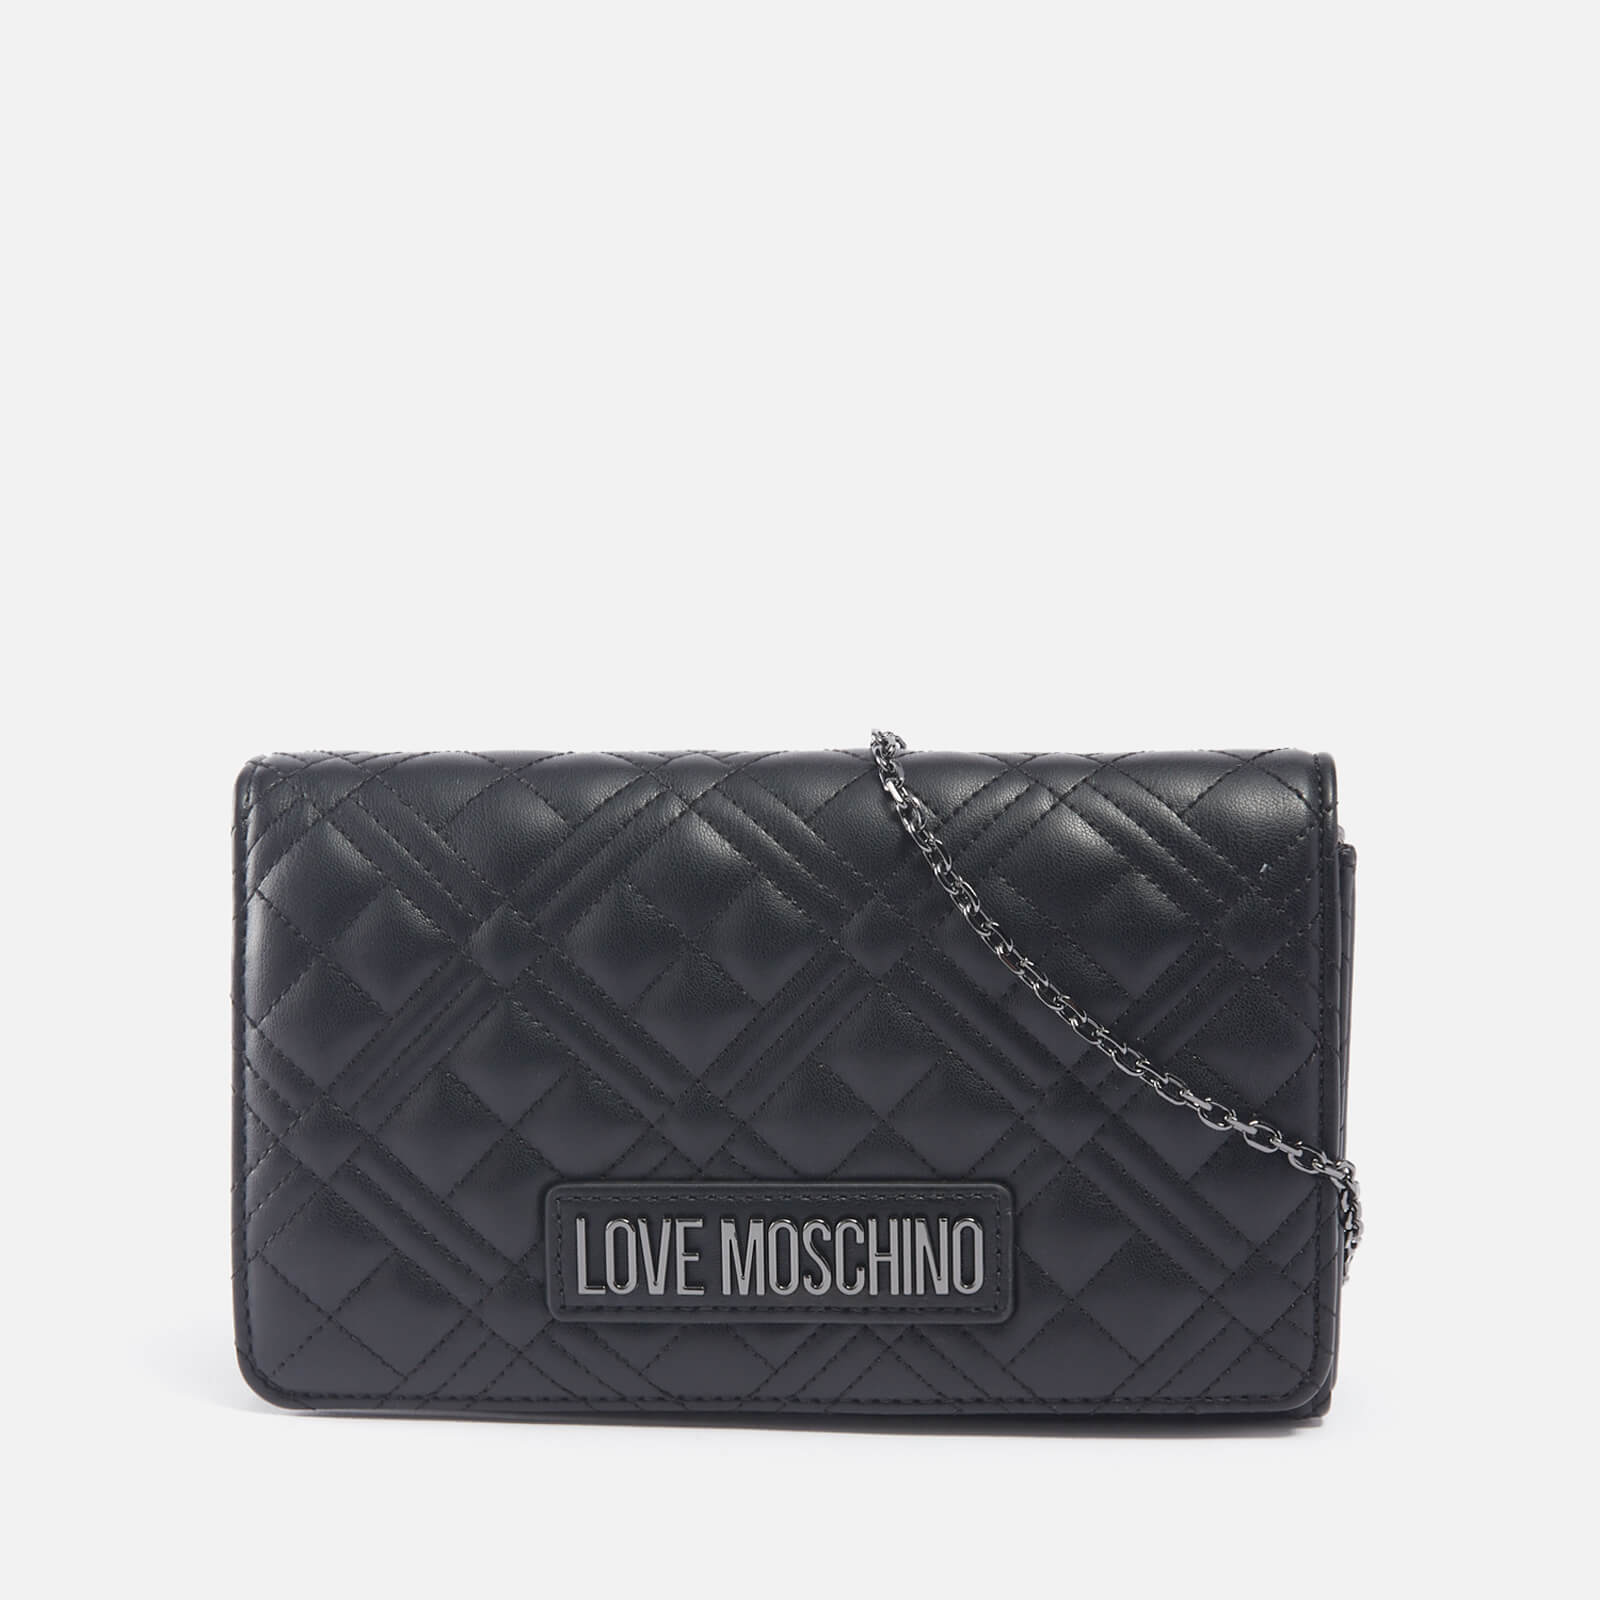 Love Moschino Borsa Quilted Faux Leather Crossbody Bag von Love Moschino